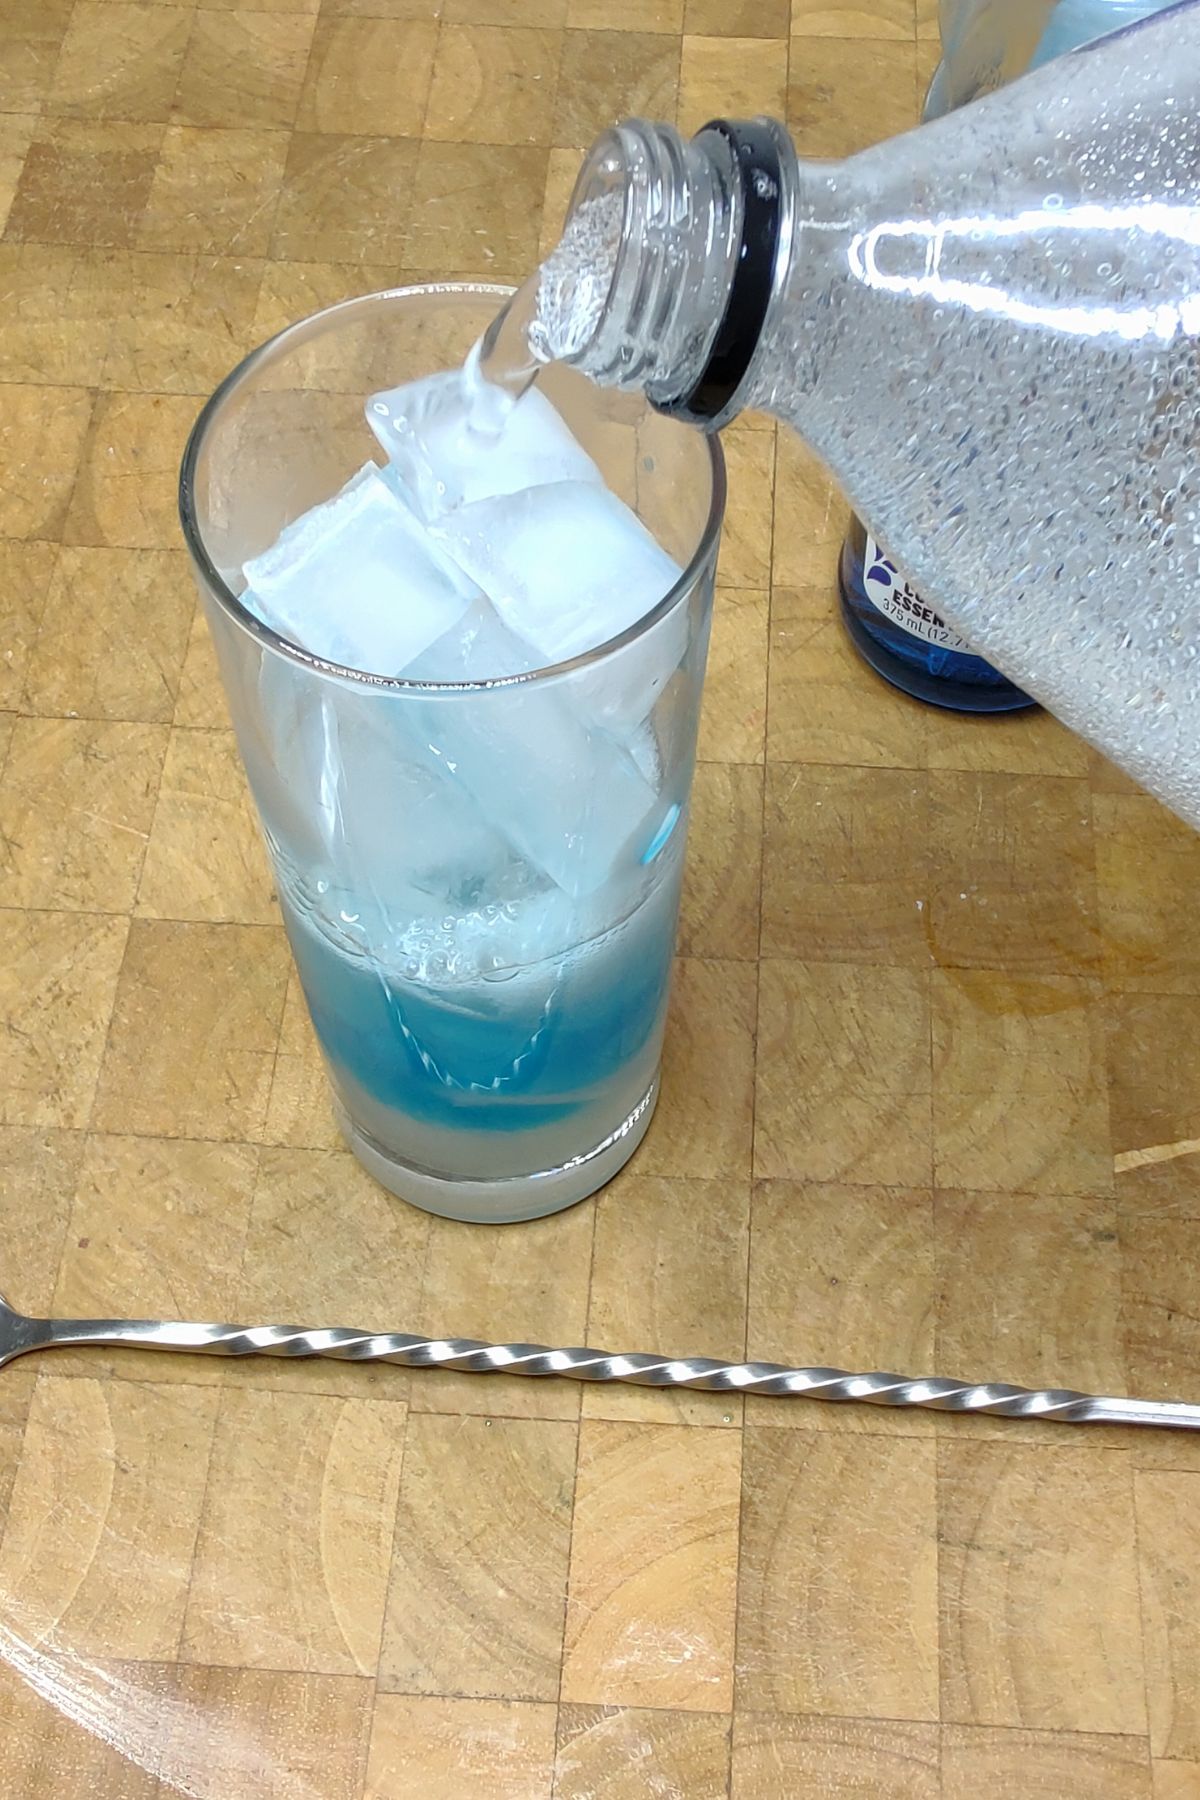 Pouring club soda from a bottle into a glass.